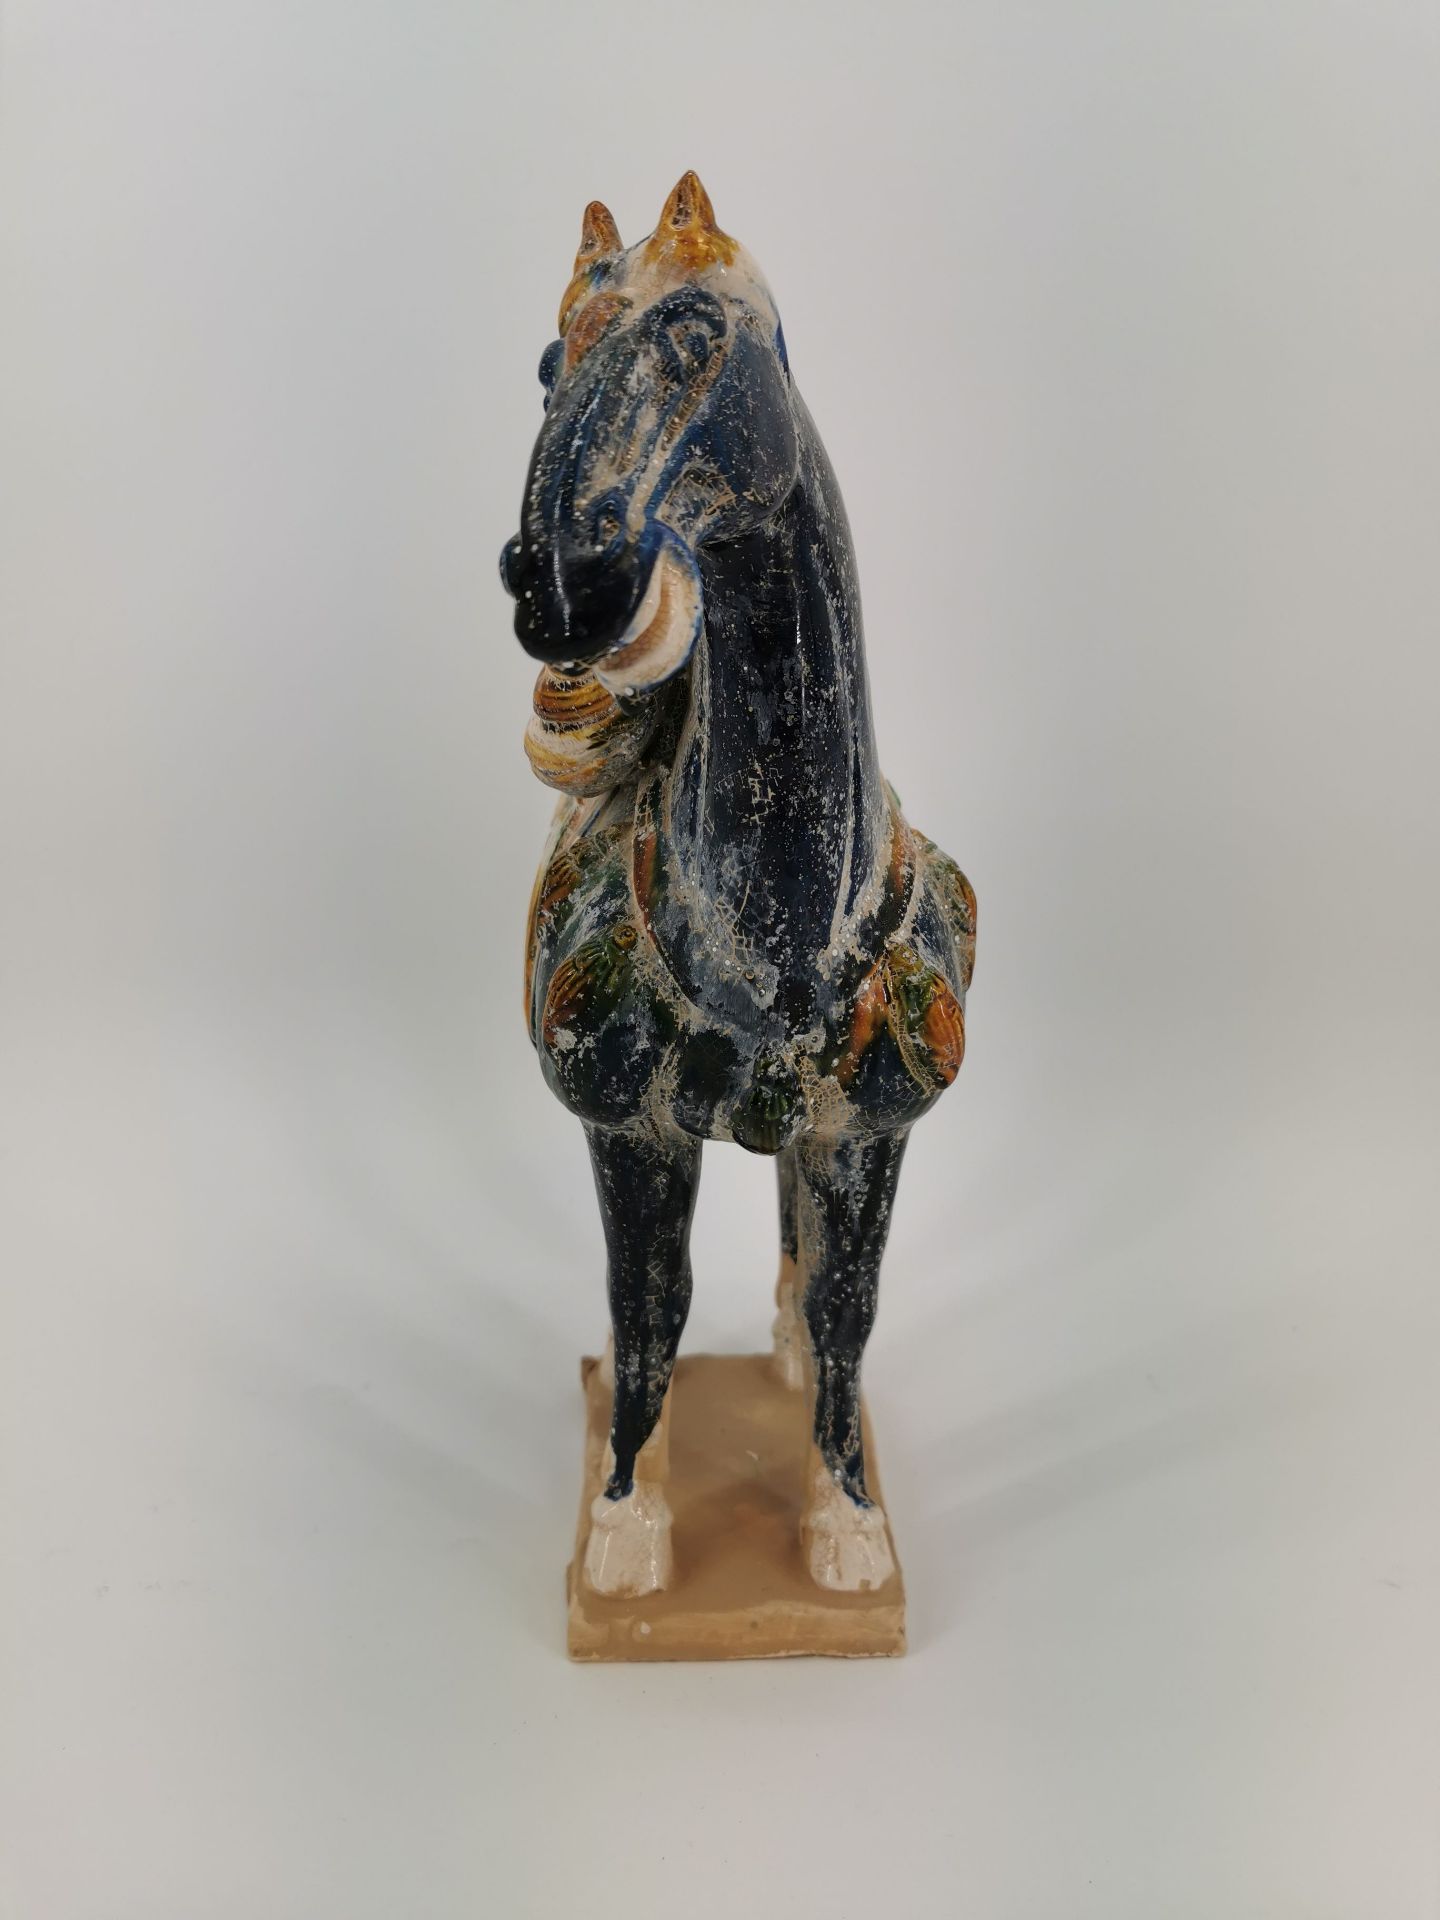 HORSE IN TANG-STYLE - Image 2 of 4